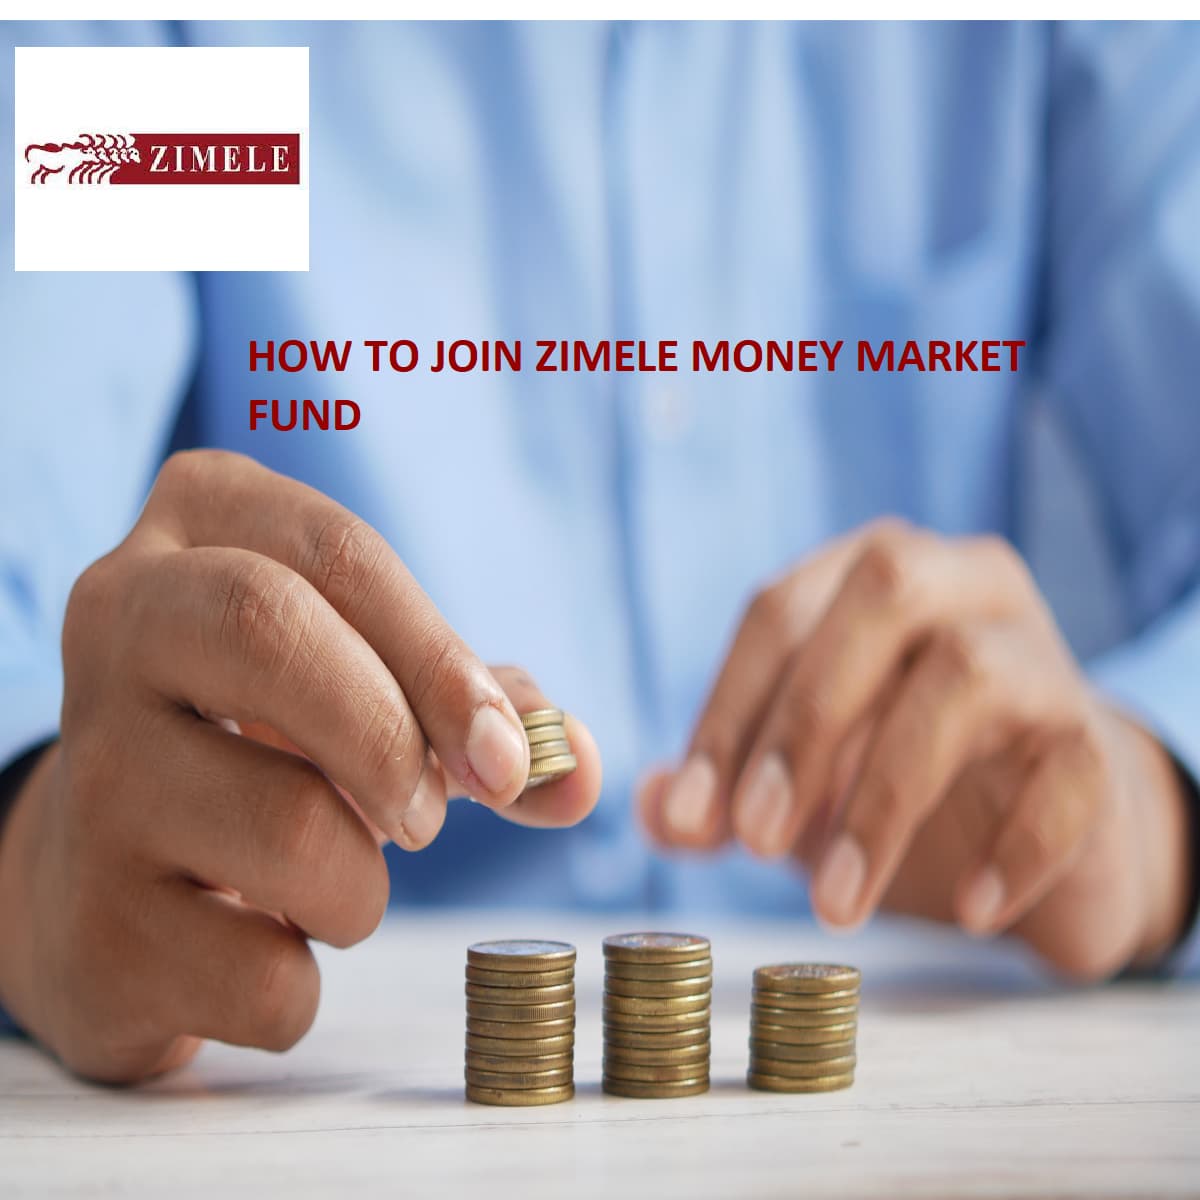 How to Join Zimele Money Market Fund